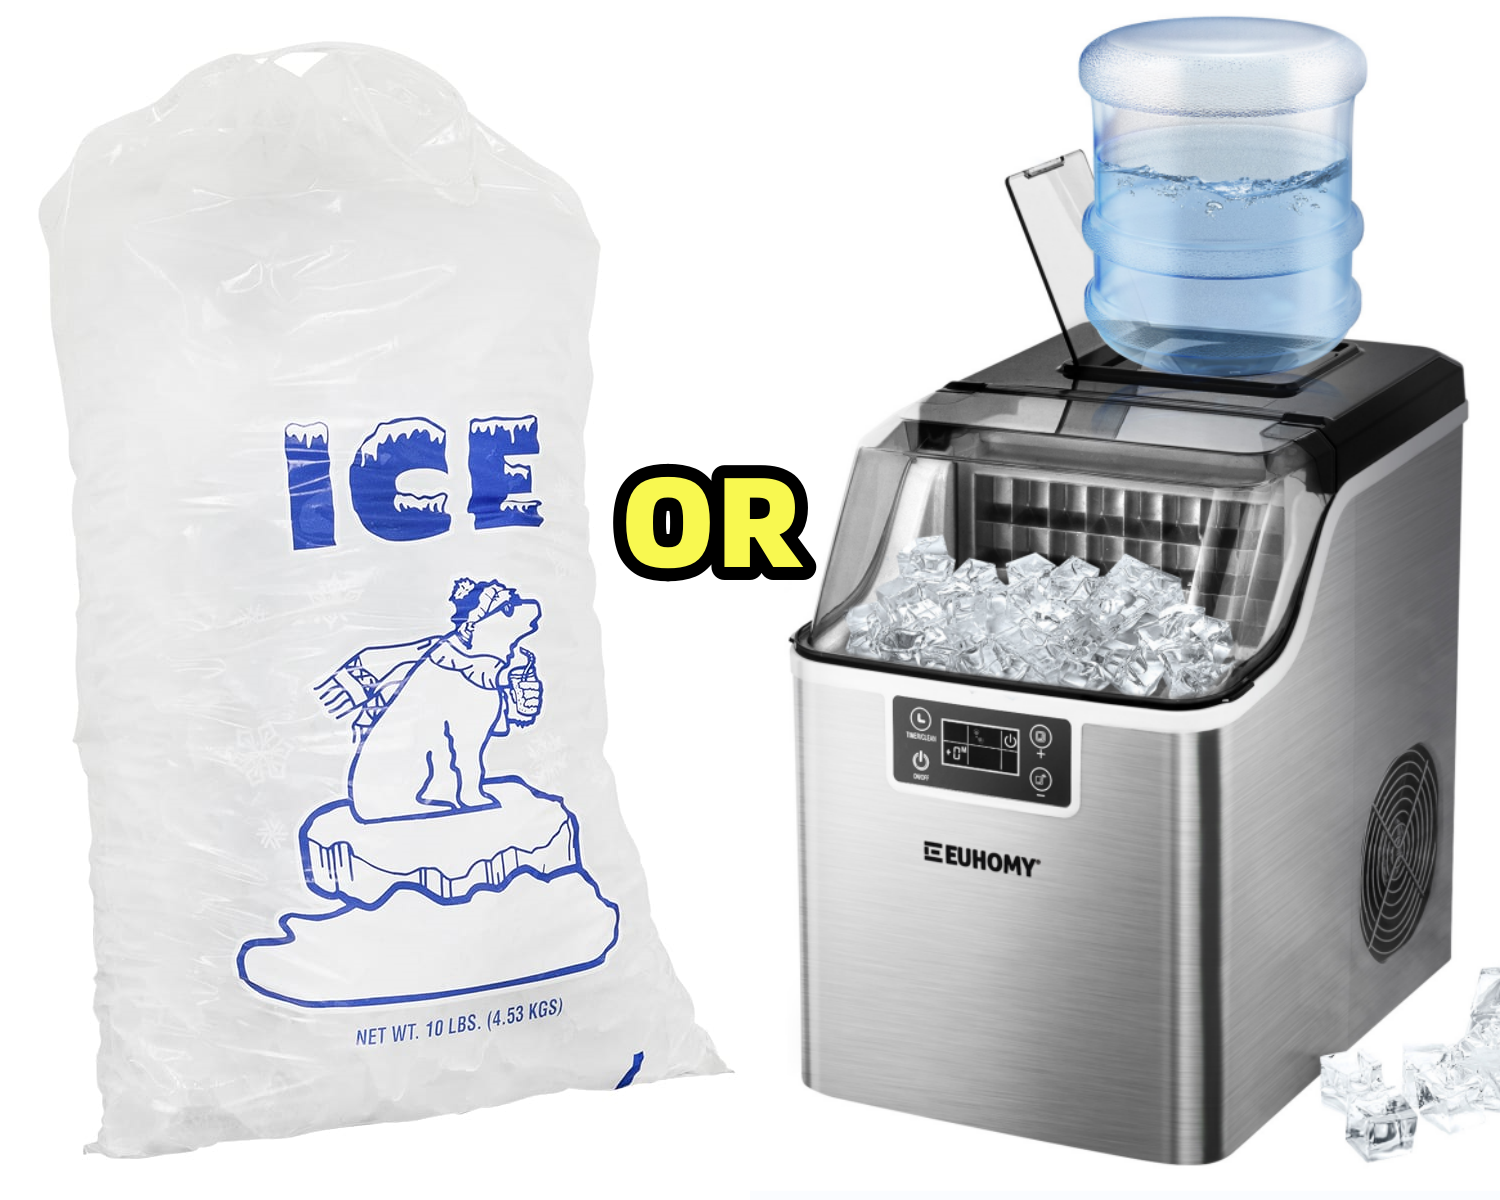 Benefits of Having Your Own Ice Machine Vs. Ice Bags